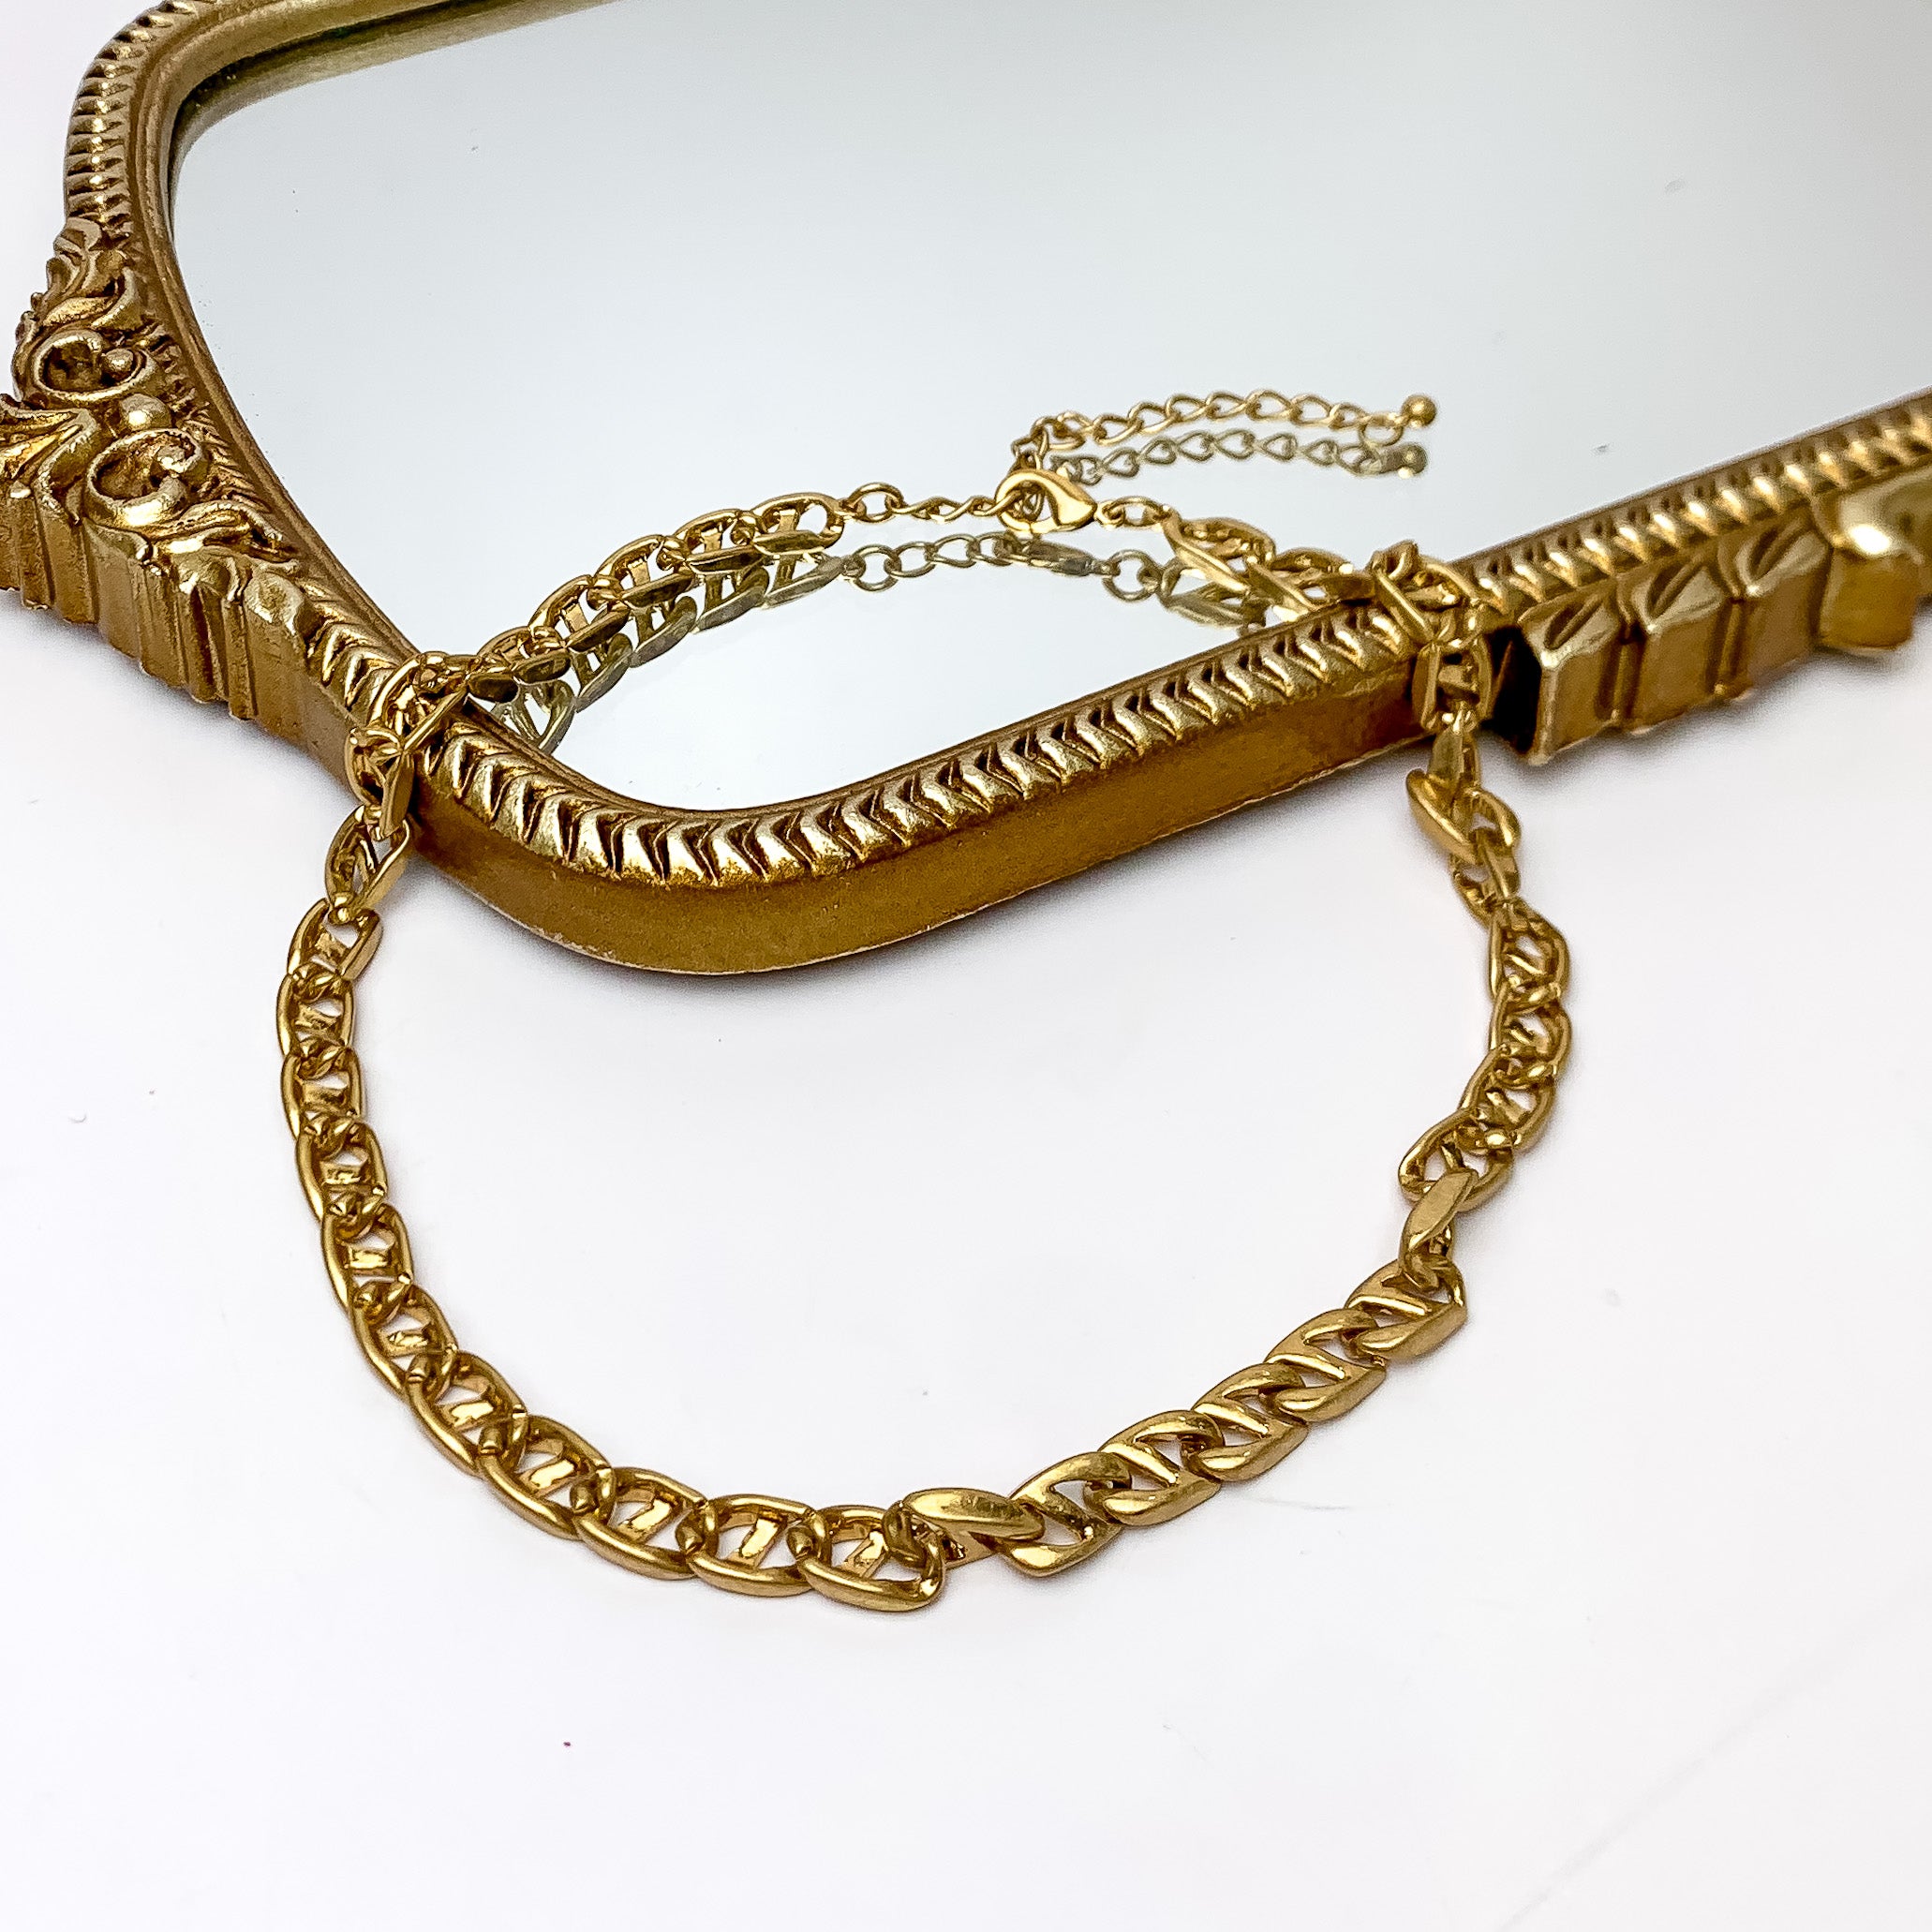 Plain As Day Gold Tone Chain Necklace. Pictured on a white background with part of the necklace laying on a gold trimmed mirror.